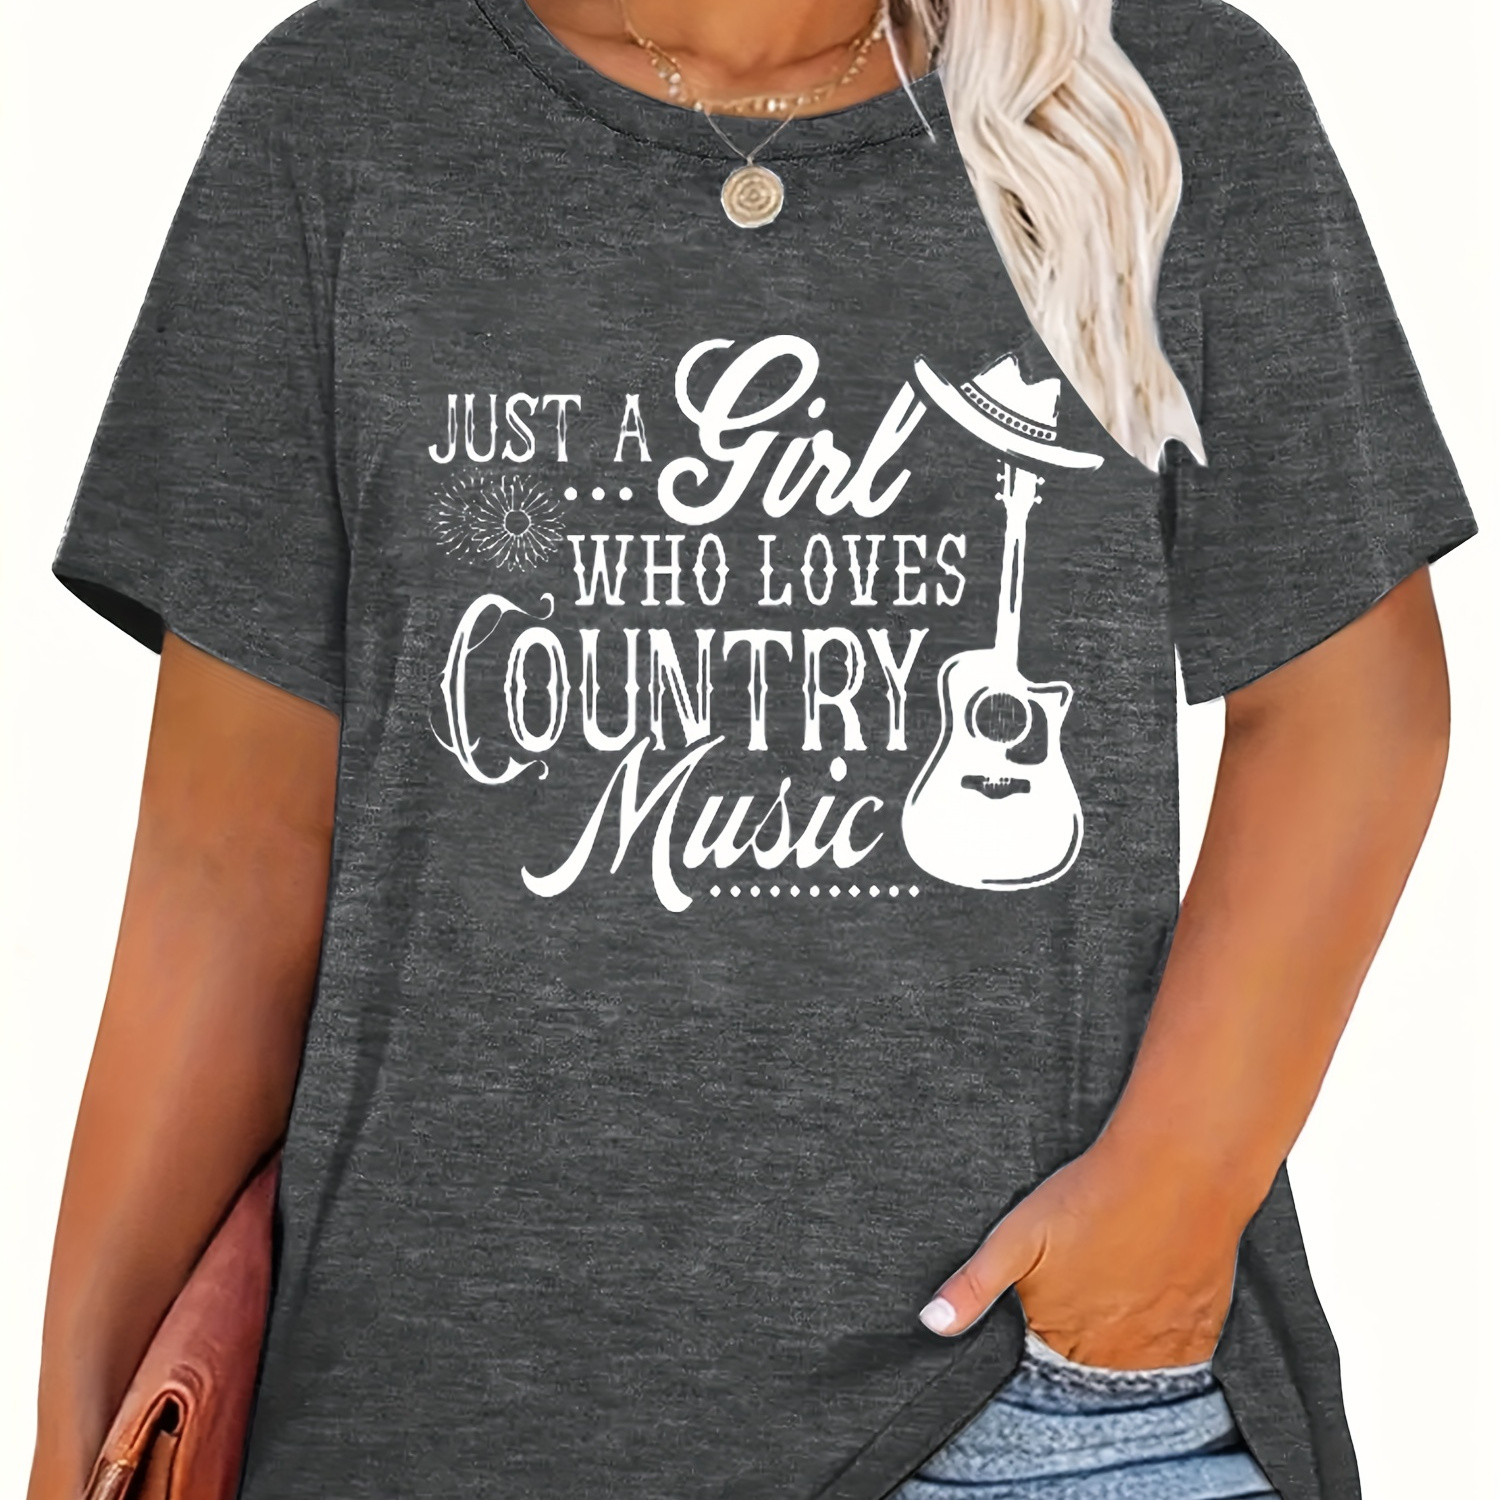 

Plus Size Country Music Print T-shirt, Casual Short Sleeve Crew Neck Top For Spring & Summer, Women's Plus Size Clothing